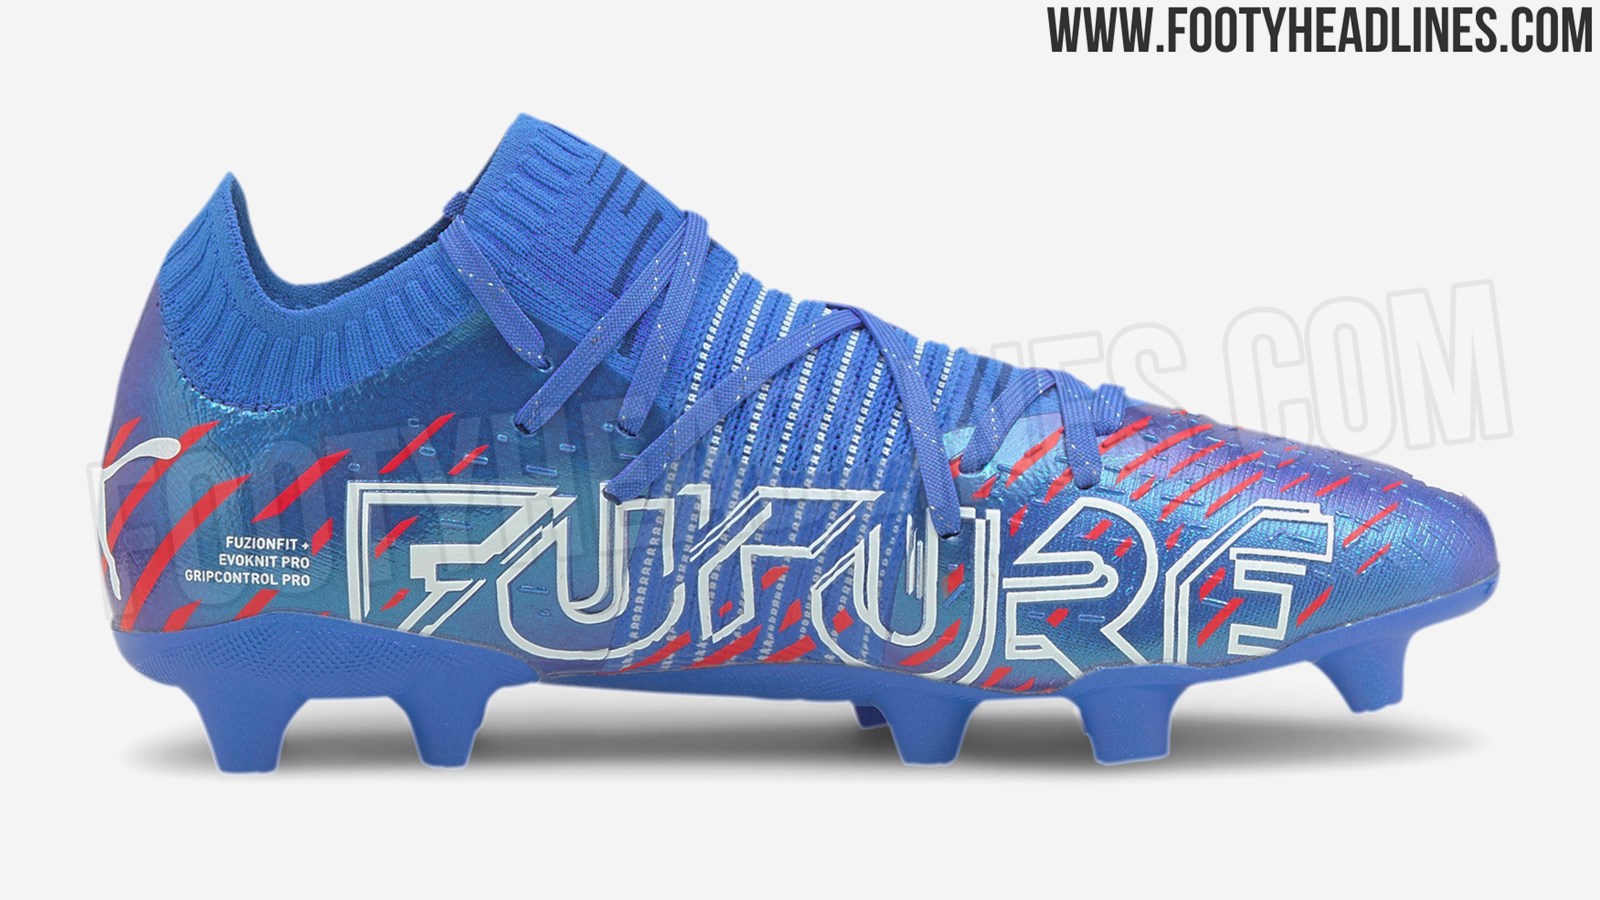 Nike-Esque Neymar Launch Video: Next-Gen Puma Future Z 2021 'Game On' Pack  Boots Released - Footy Headlines